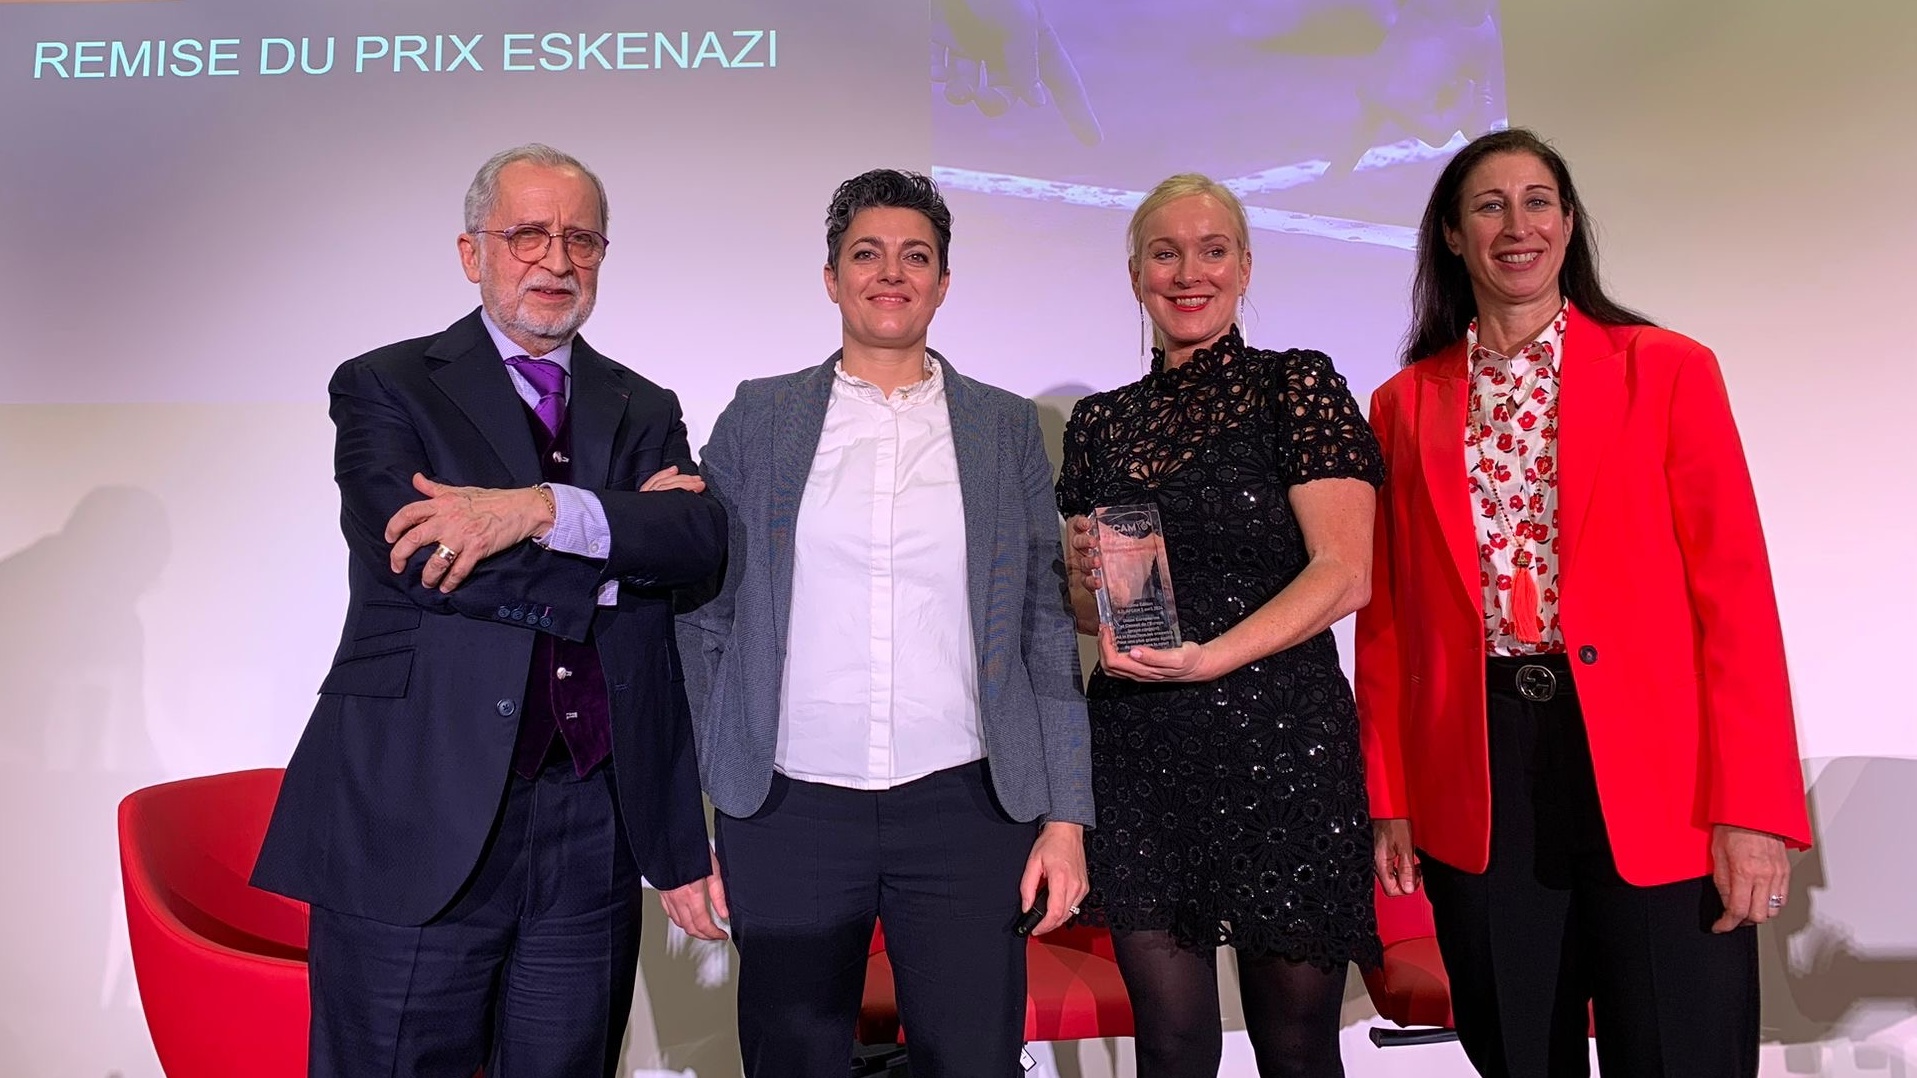 "All In Plus" joint European Union - Council of Europe project receives the Grand Prix Edouard Eskenazi by AFCAM